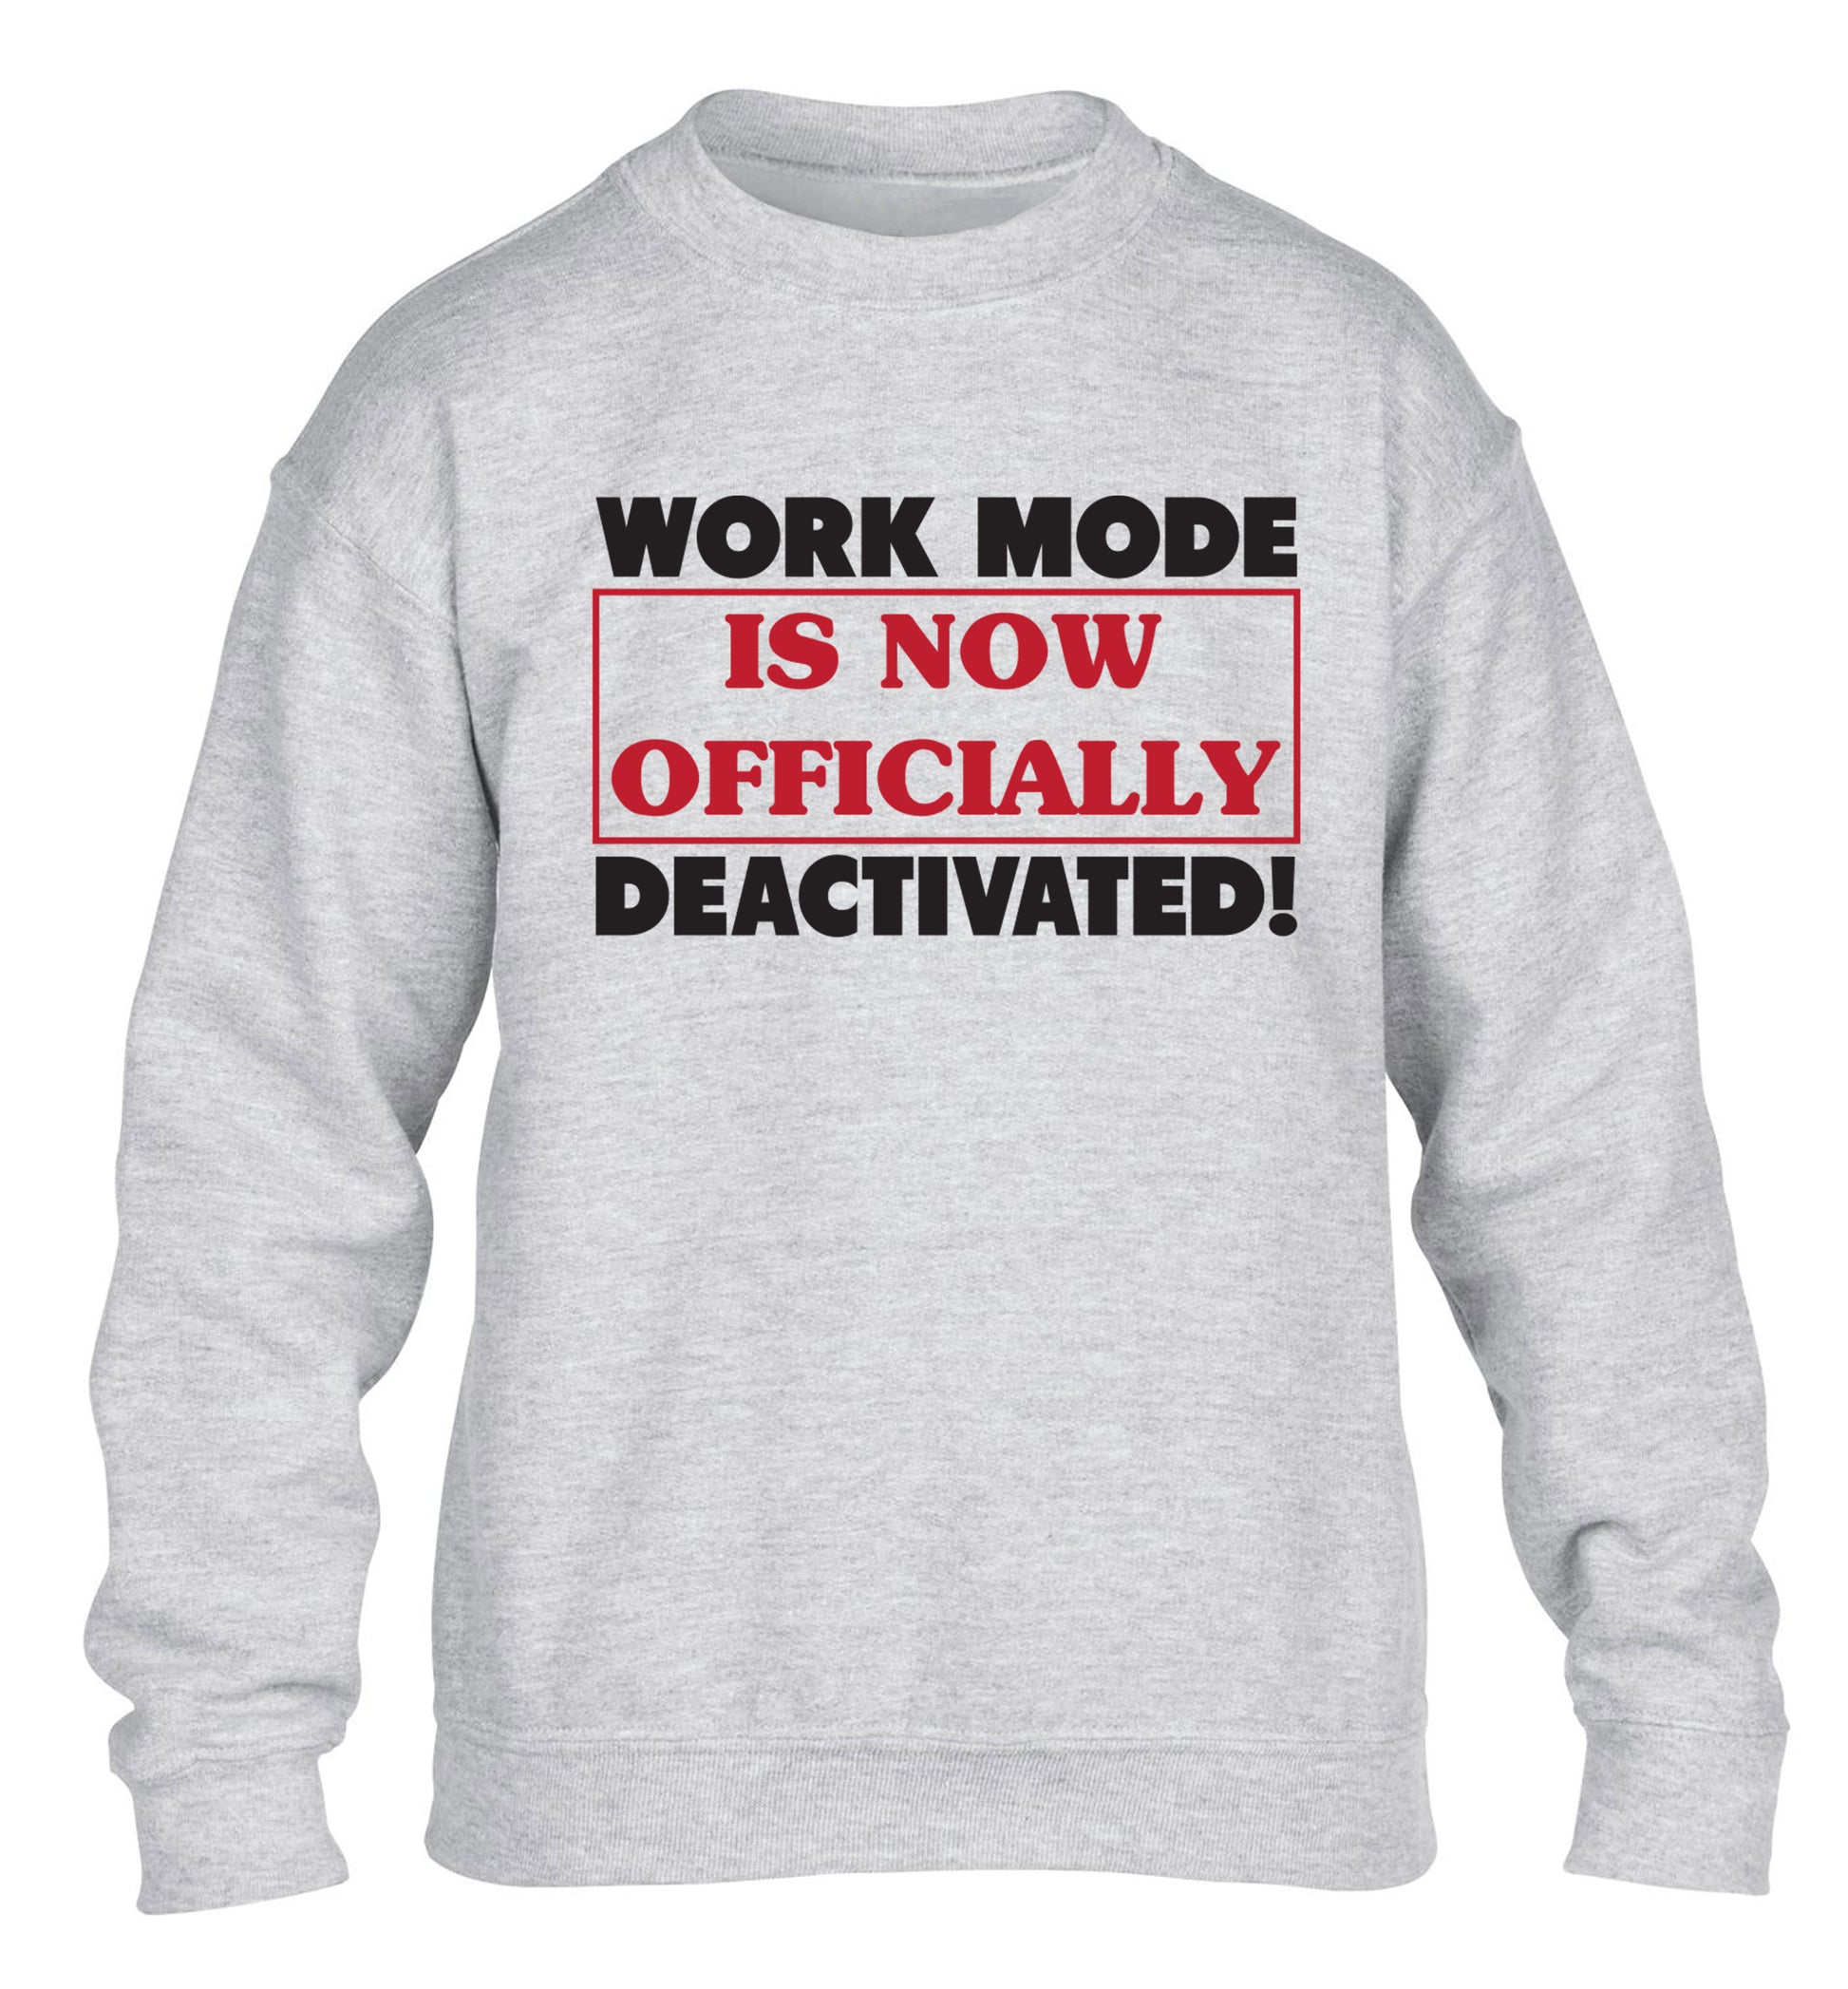 Work mode is now officially deactivated children's grey sweater 12-13 Years